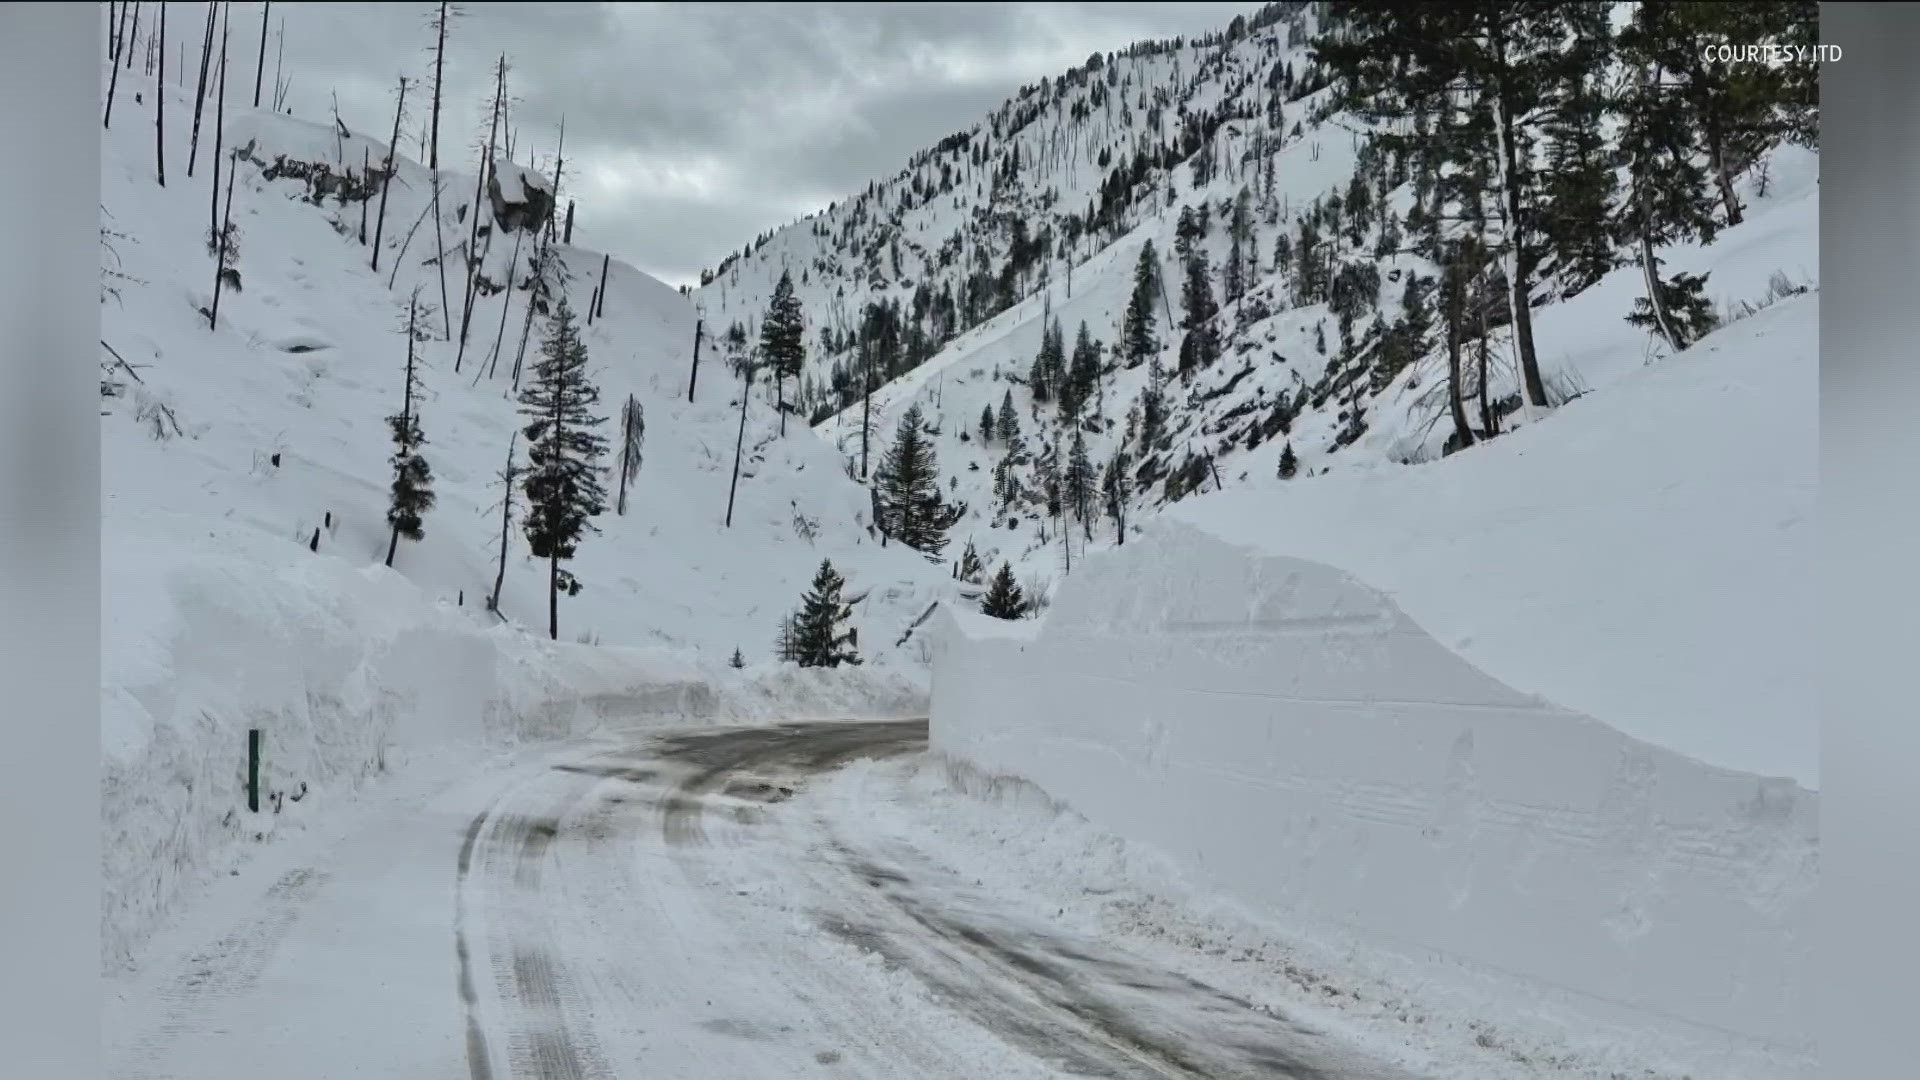 The section of State Highway 21 between Grandjean and Banner Summit reopened around 3:45 p.m. Saturday after 14 avalanches in the region over the weekend.